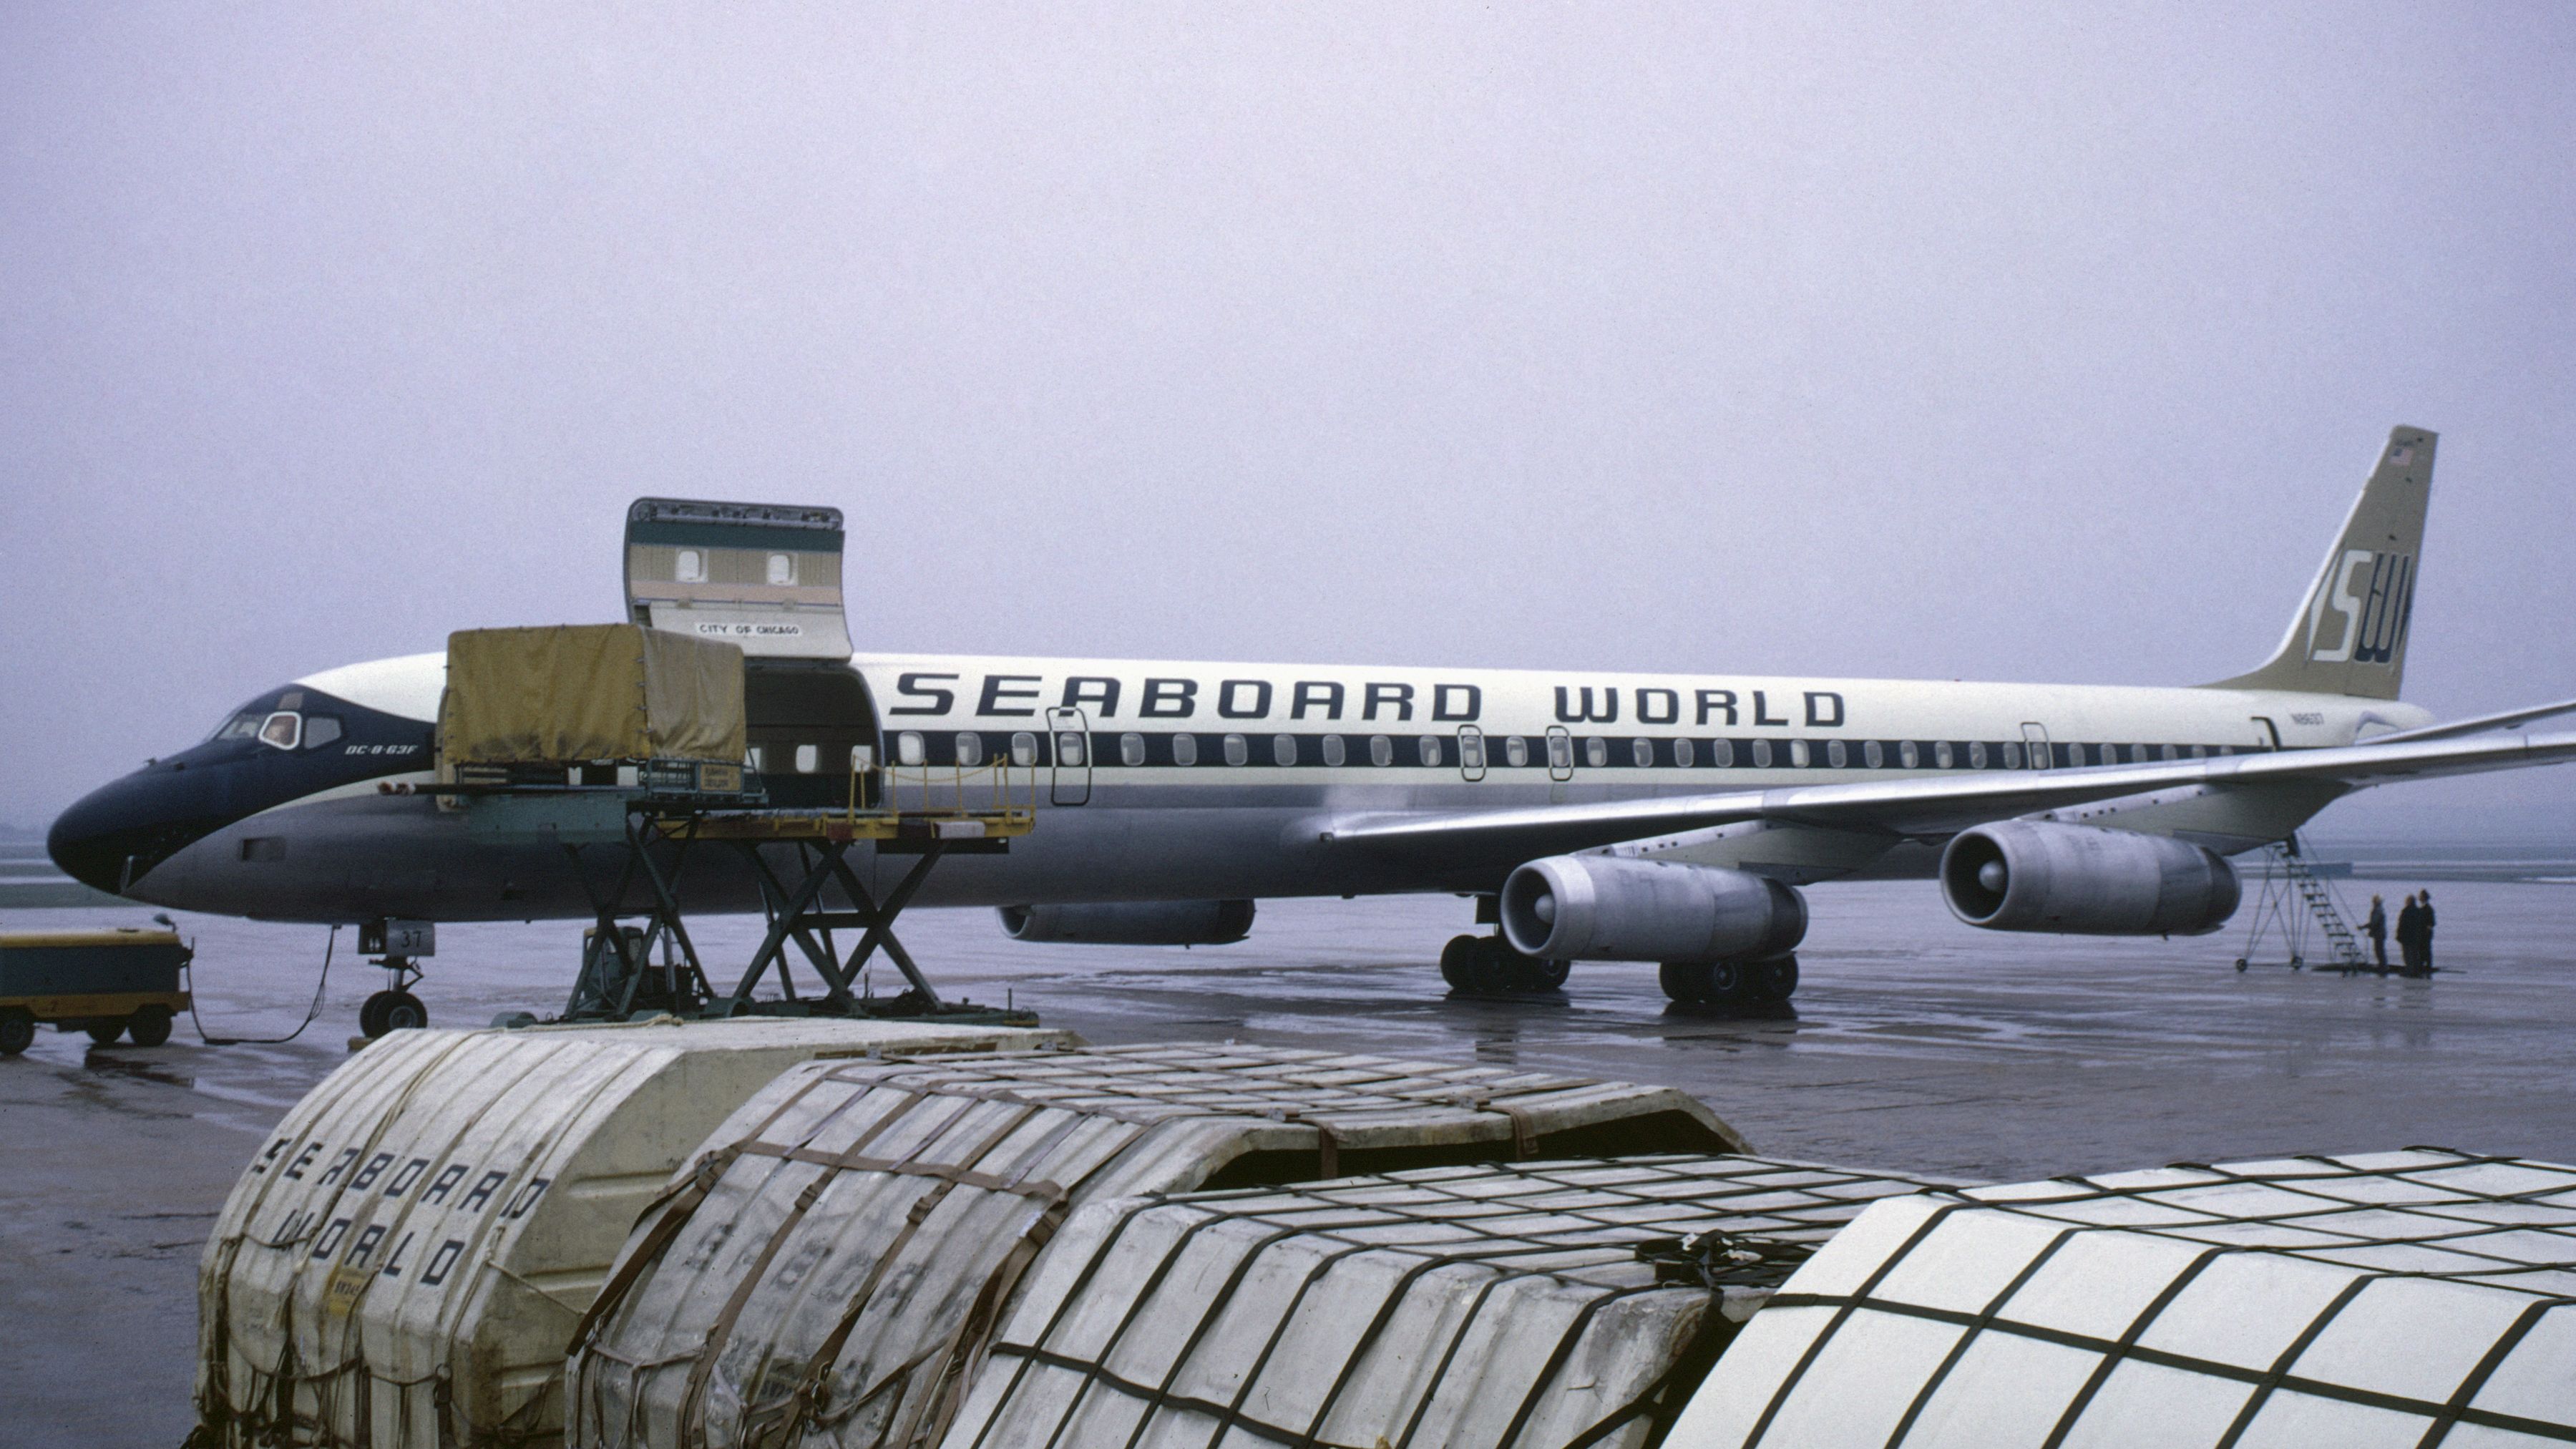 McDonnell Douglas DC-8-60 (N8637) - Seaboard World DC-8-63CF "City of Chicago" in April 1970 at Düsseldorf (EDDL). Was converted to DC-8-73CF in 1985 by UPS (N852UP) - wfu in 2009 after 40 years in service. 